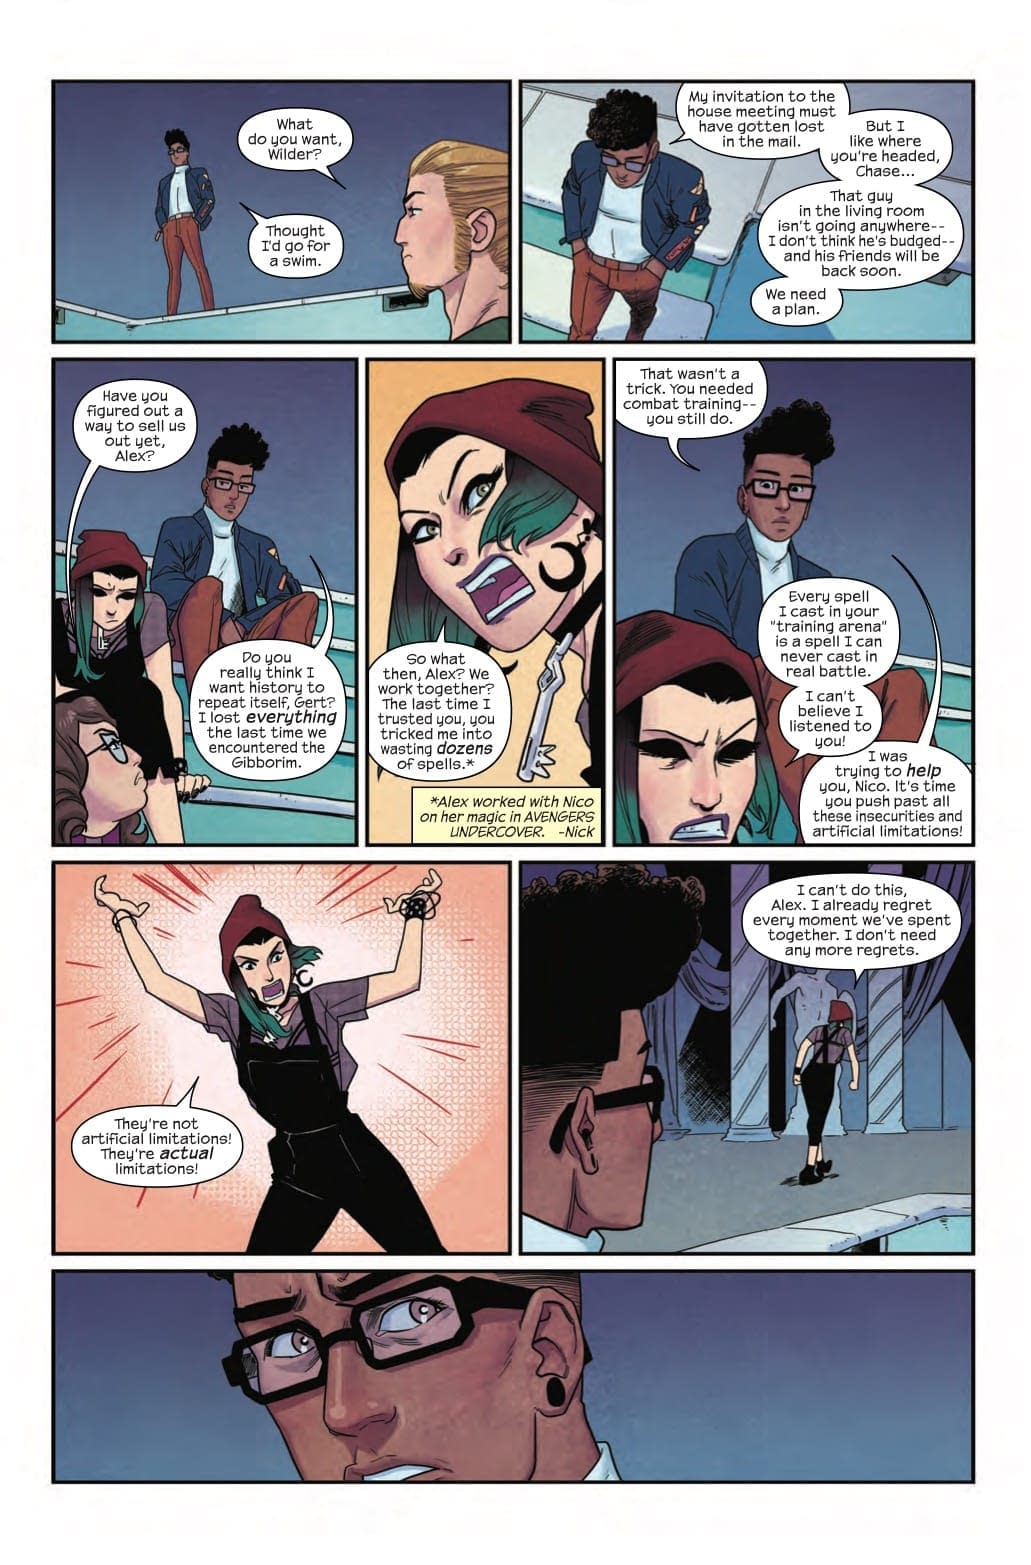 The World's Worst Pool Party in Next Week's Runaways #15